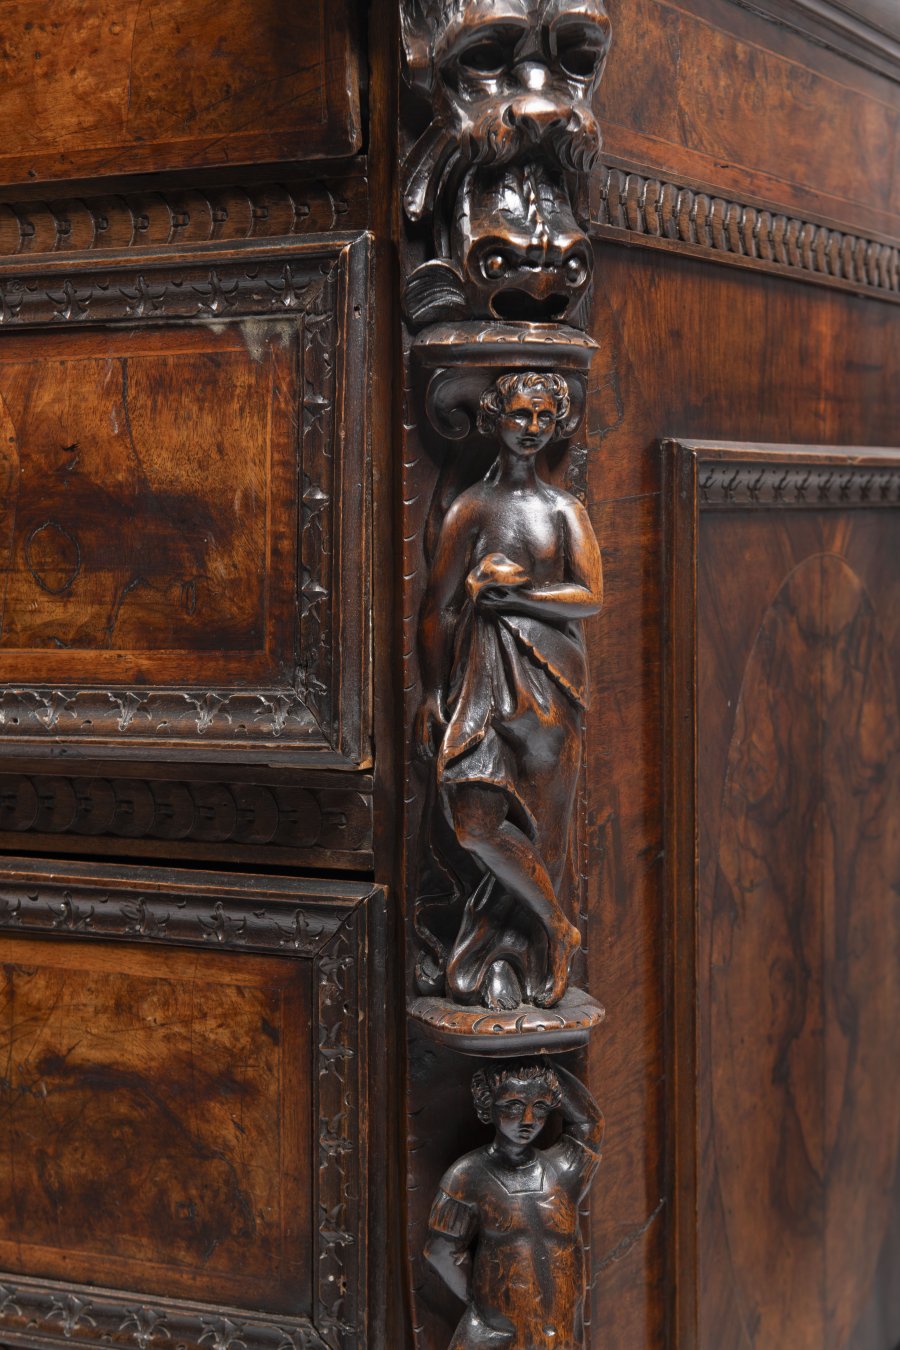 MANNERIST CHEST OF DRAWERS "A BAMBOCCI"